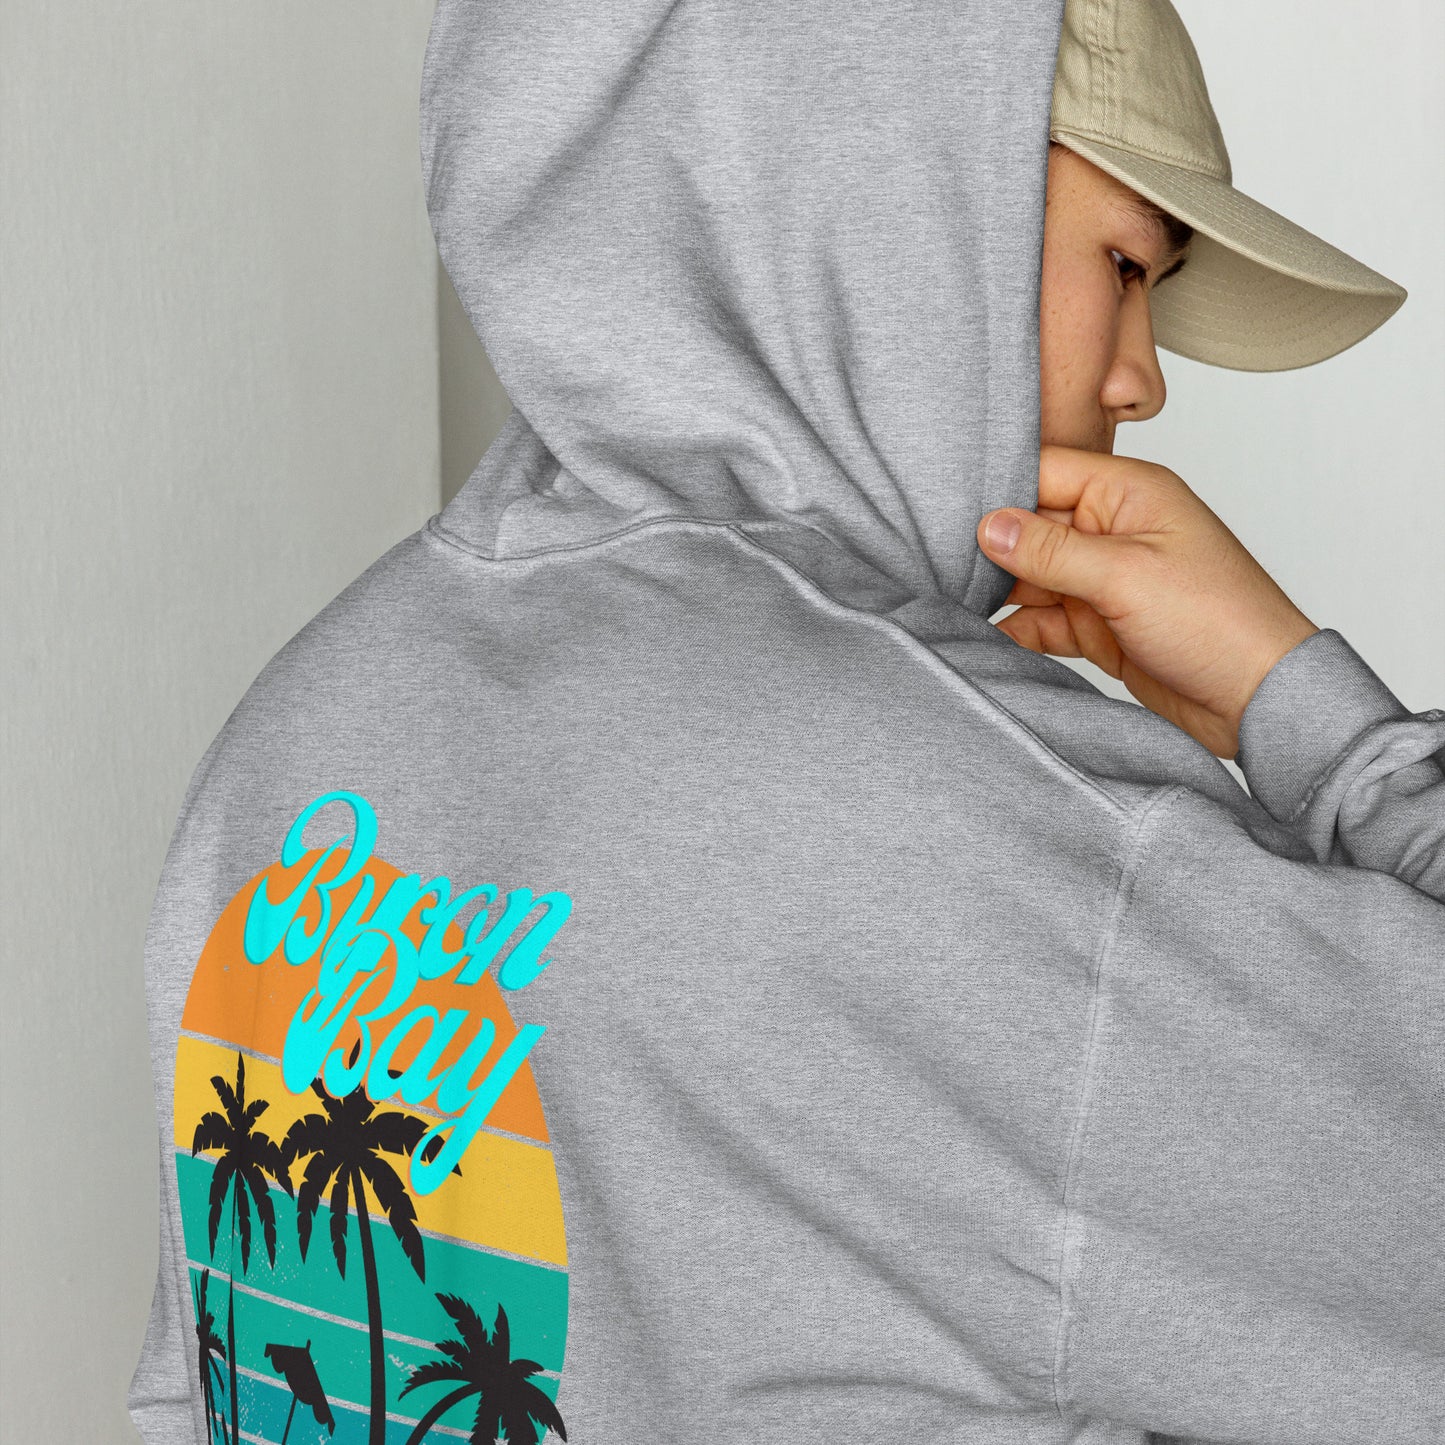  Unisex Hoodie - Sport Grey - Side back view being warn by man with the hood on looking back over his shoulder - Byron Bay design on back, plain front with pouch pocket - Genuine Byron Bay Merchandise | Produced by Go Sea Kayak Byron Bay 